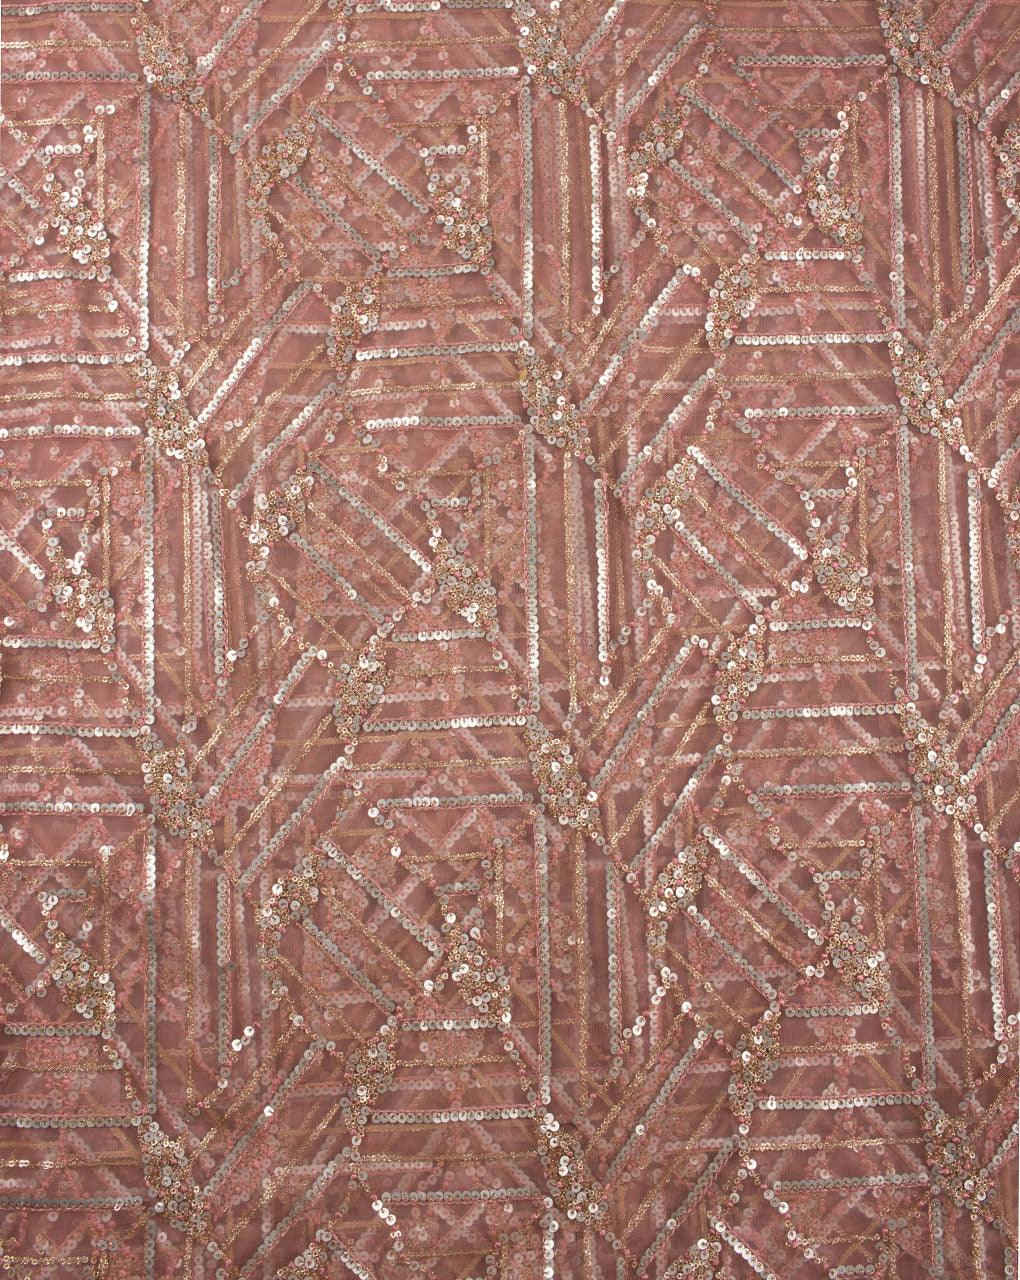 Embroidered Sequins Work Net Fabric - Fabriclore.com